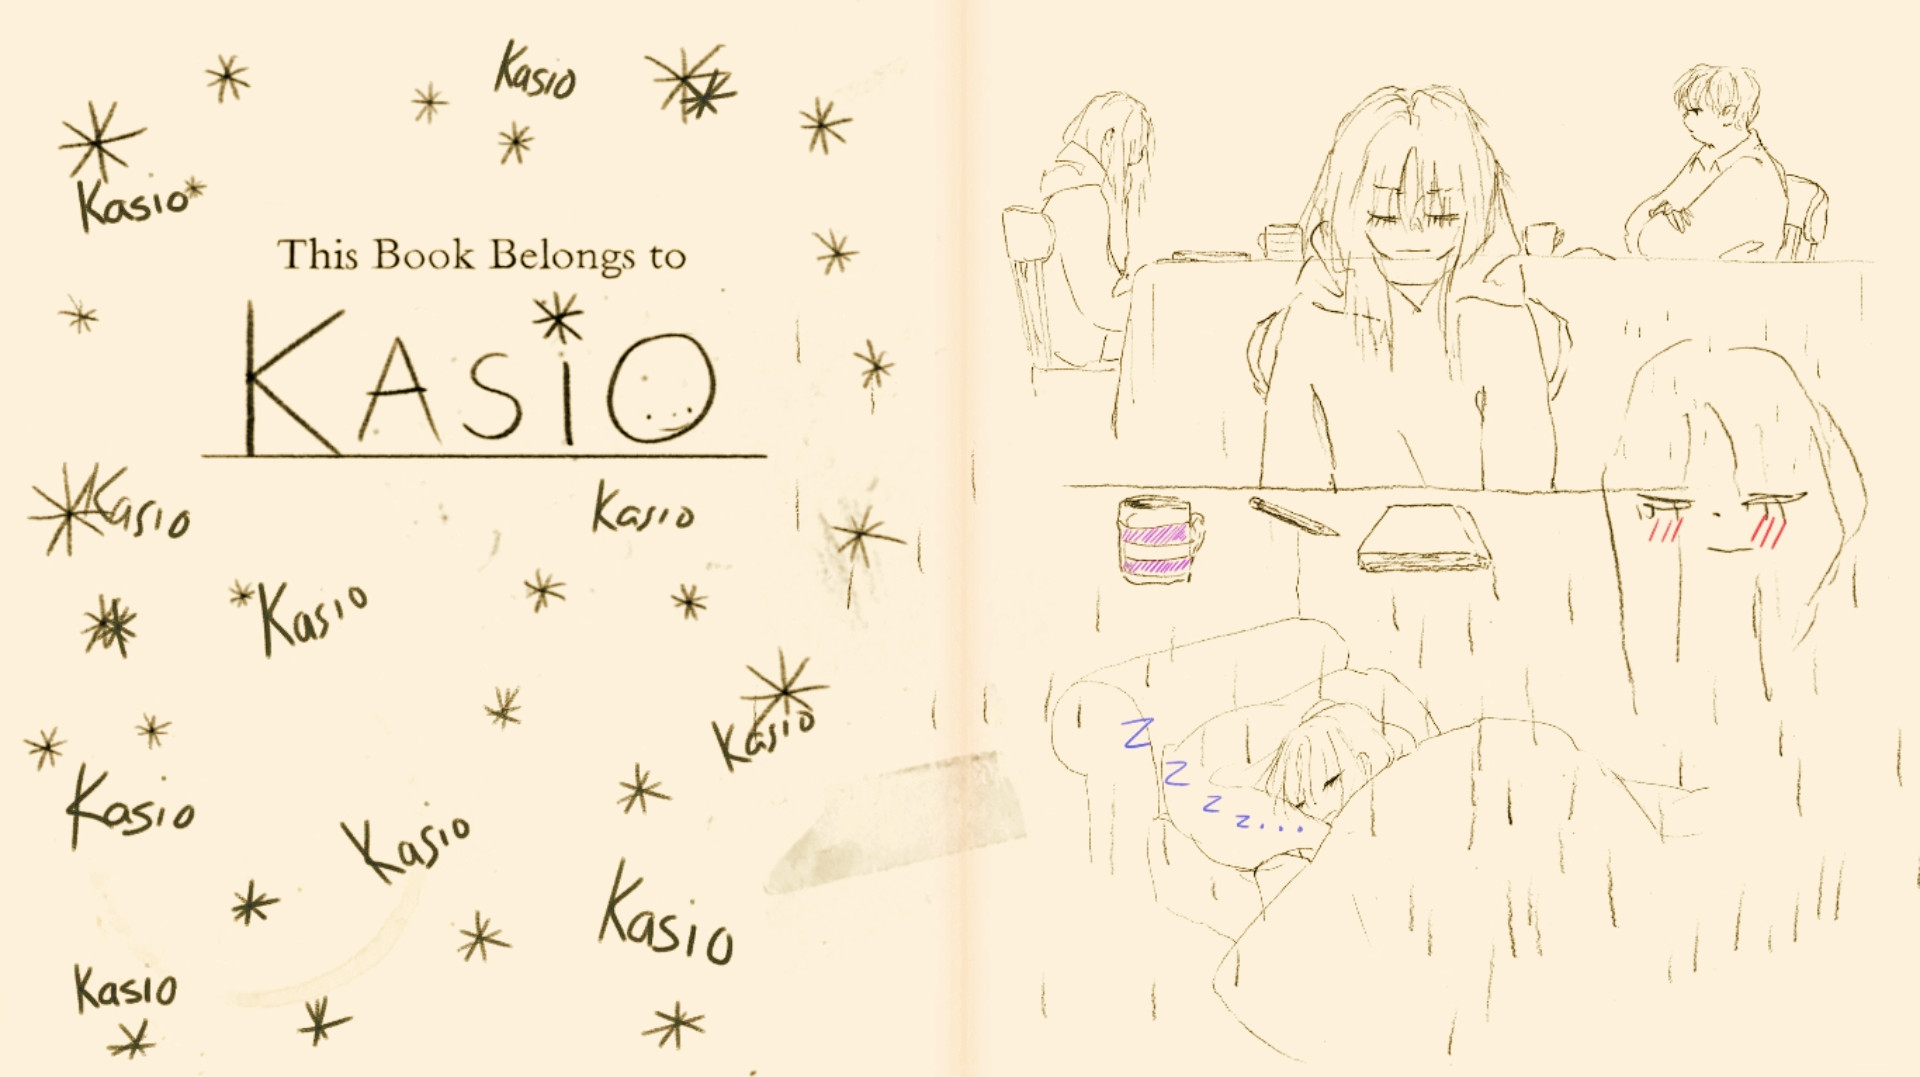 Screenshot of notebook looking paper with drawings of a young woman on the right. On the left it says "This book belongs to Kaiso" and "kaiso" is written all over the left page